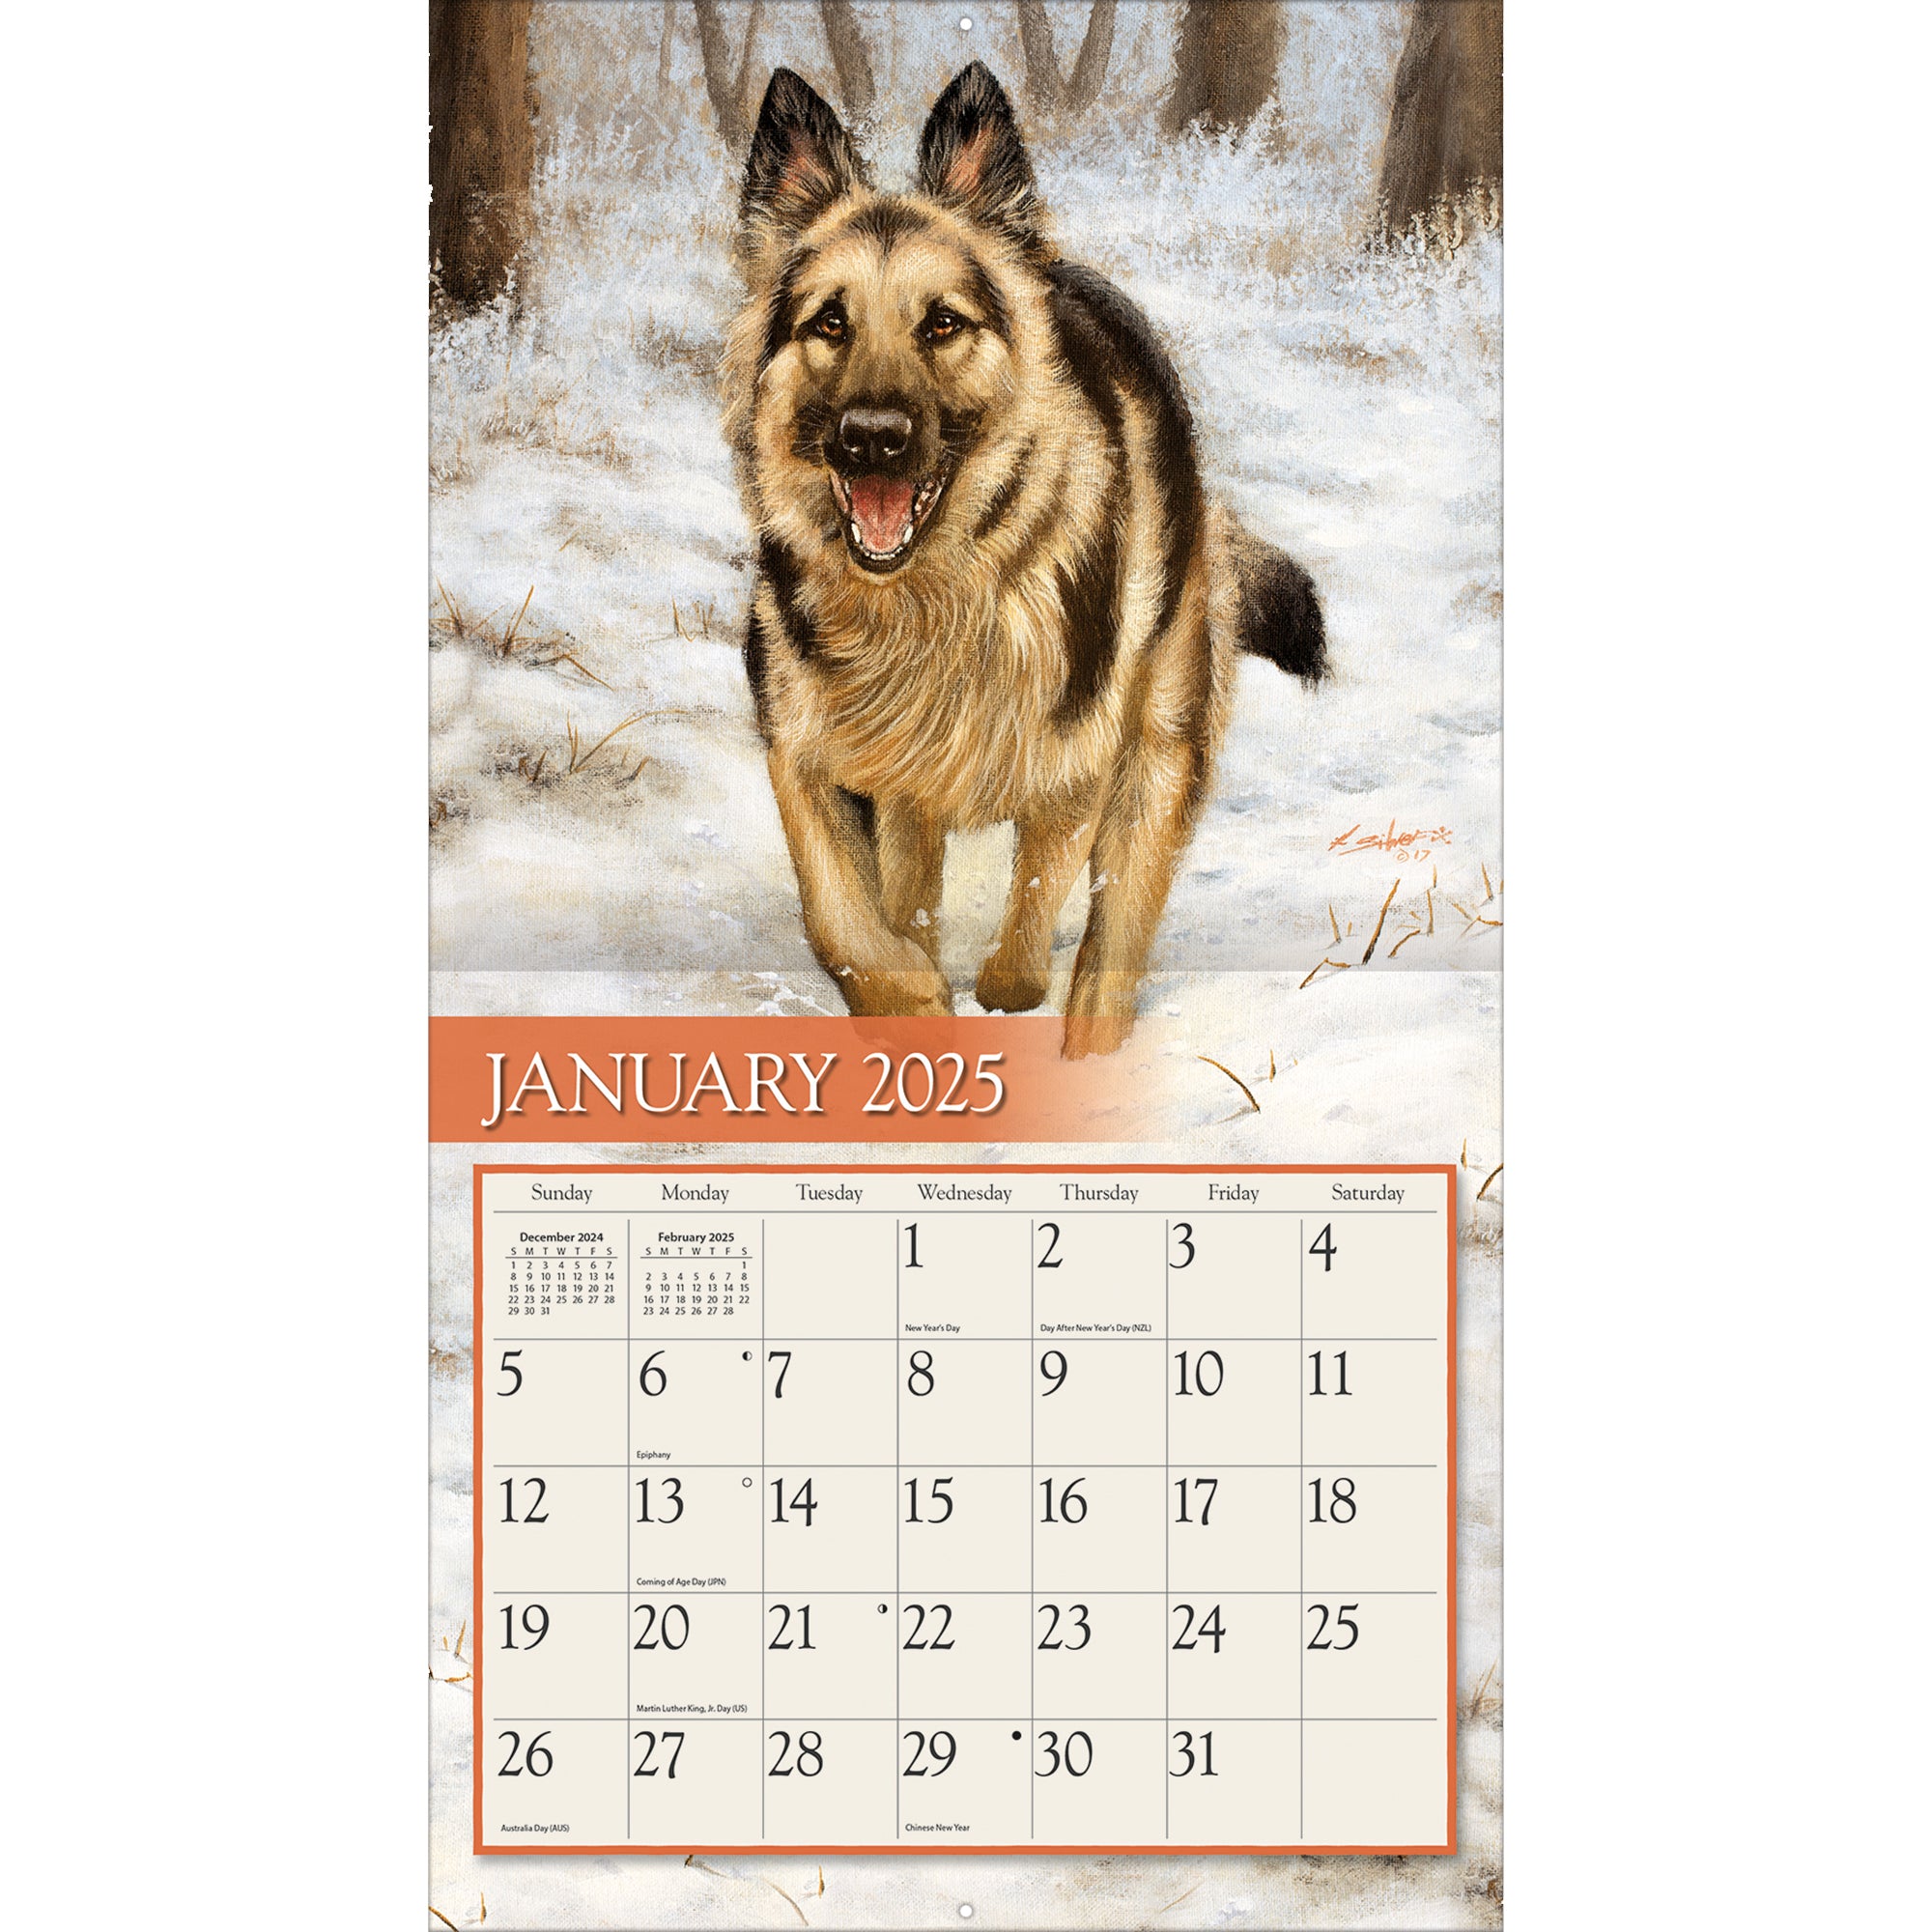 2025 Love Of Dogs By John Silver - LANG Deluxe Wall Calendar